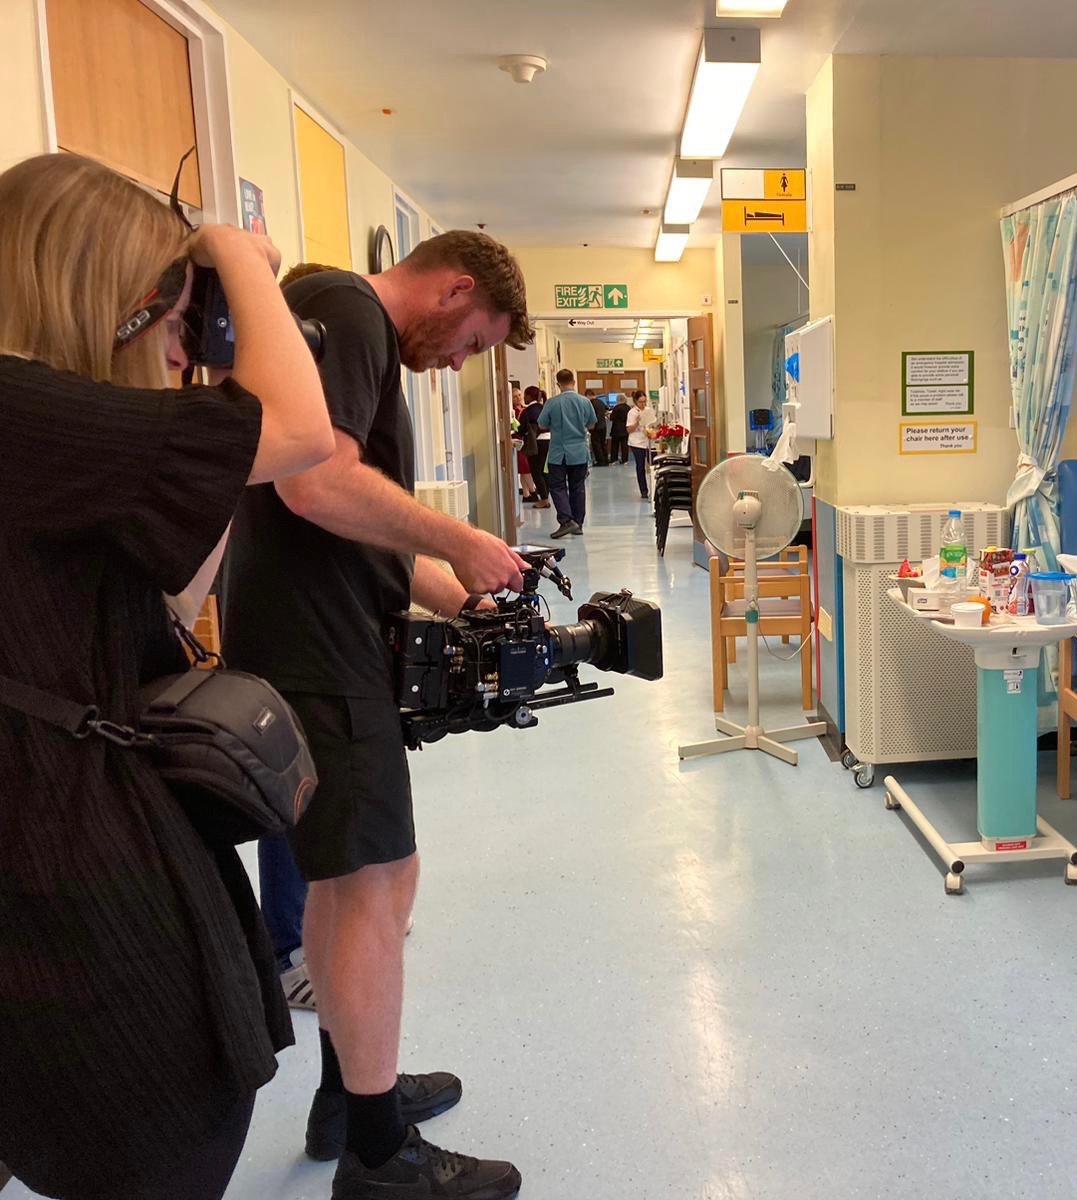 A year has come around so quickly…busy day of filming at our hospitals today for the new @nottmhospitals @TeamNUH Trust video…coming soon!